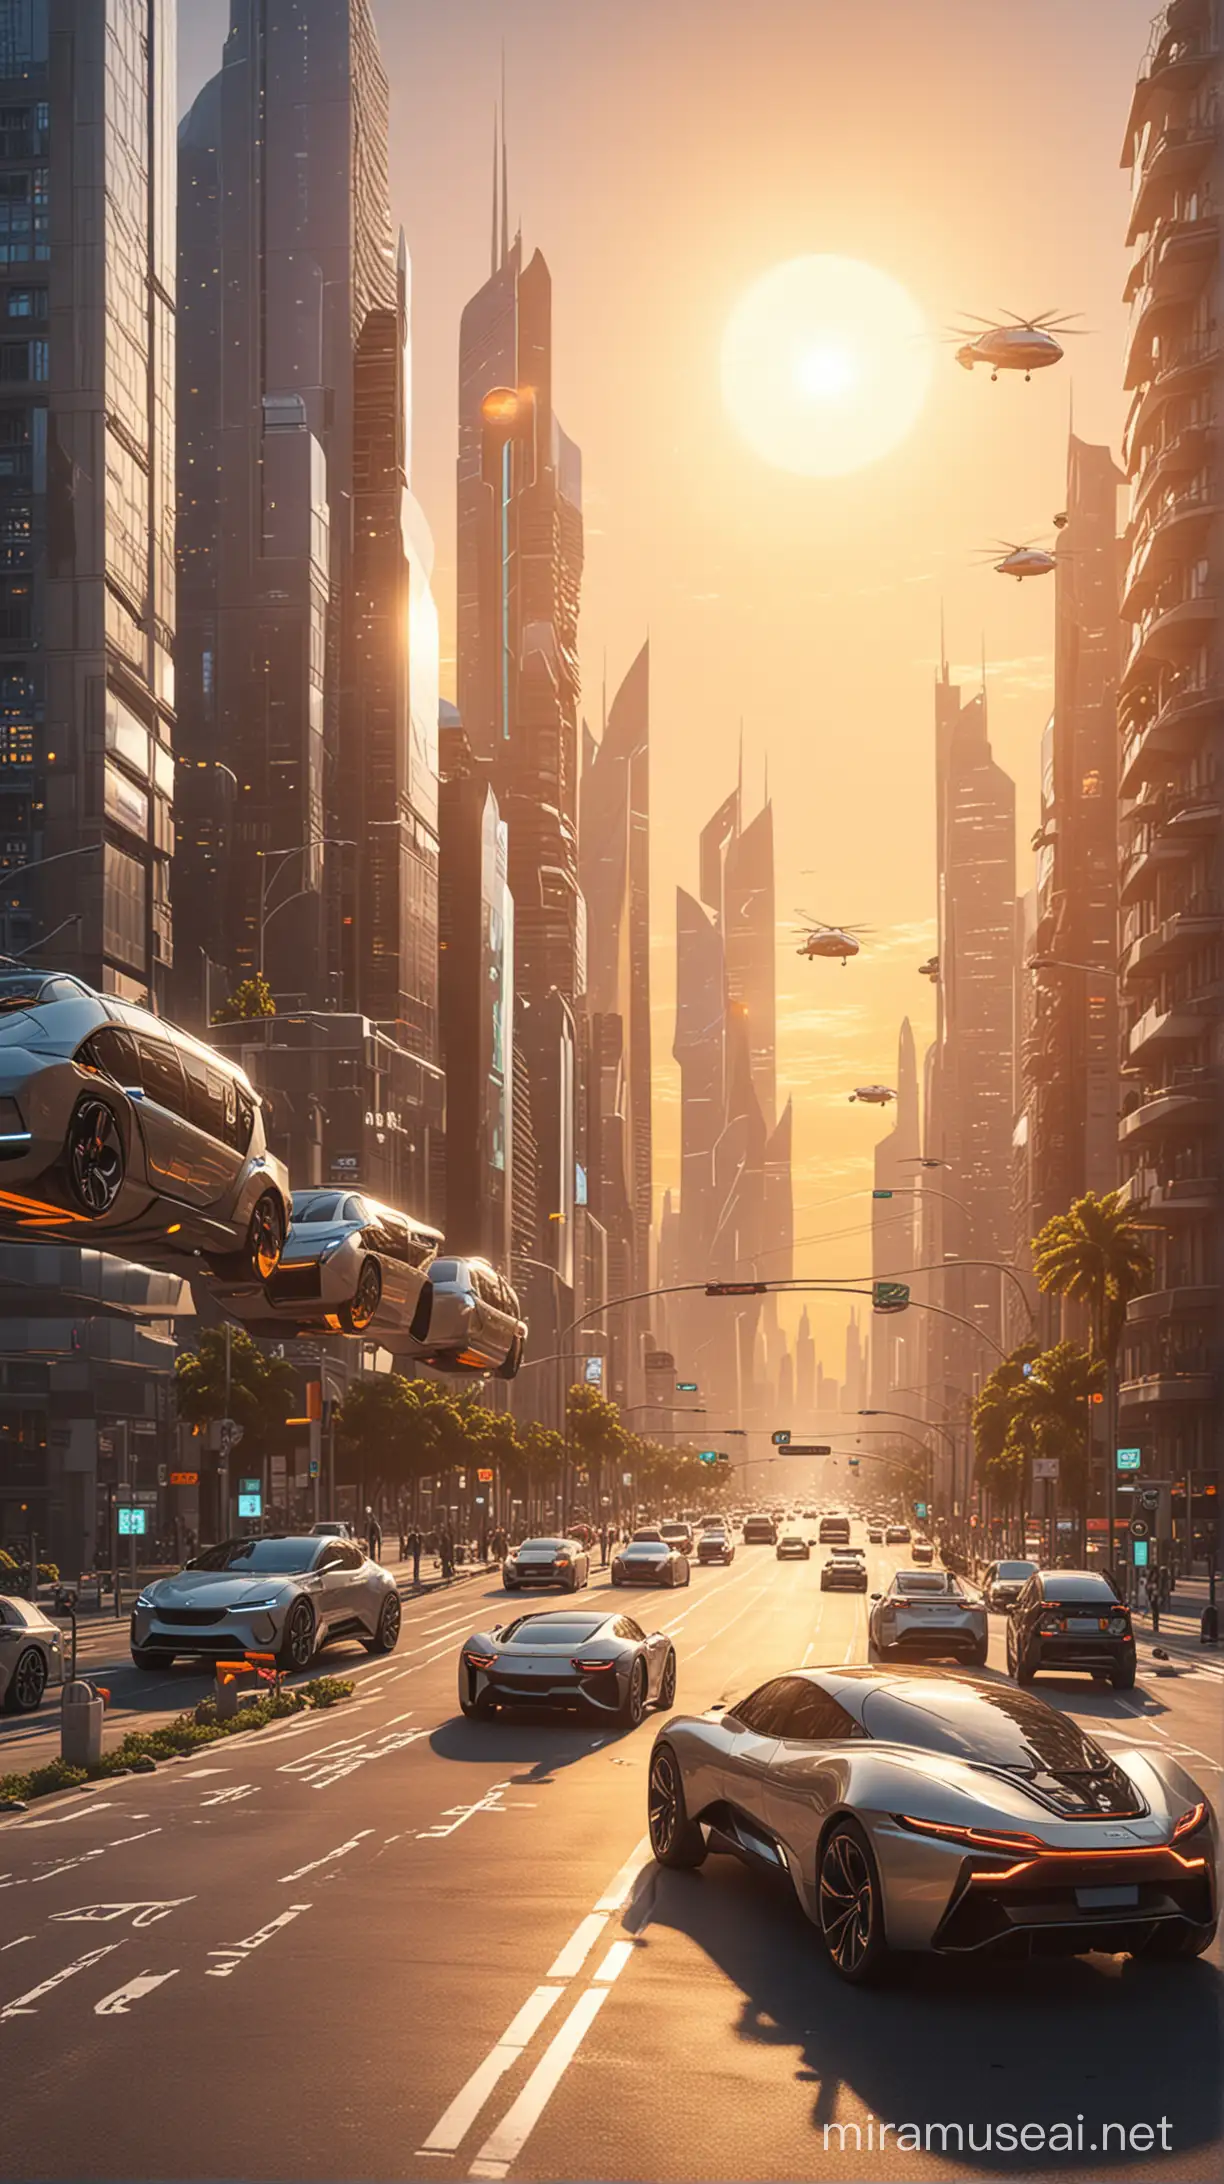 Sunset Drive in Futuristic City with Electric Vehicles